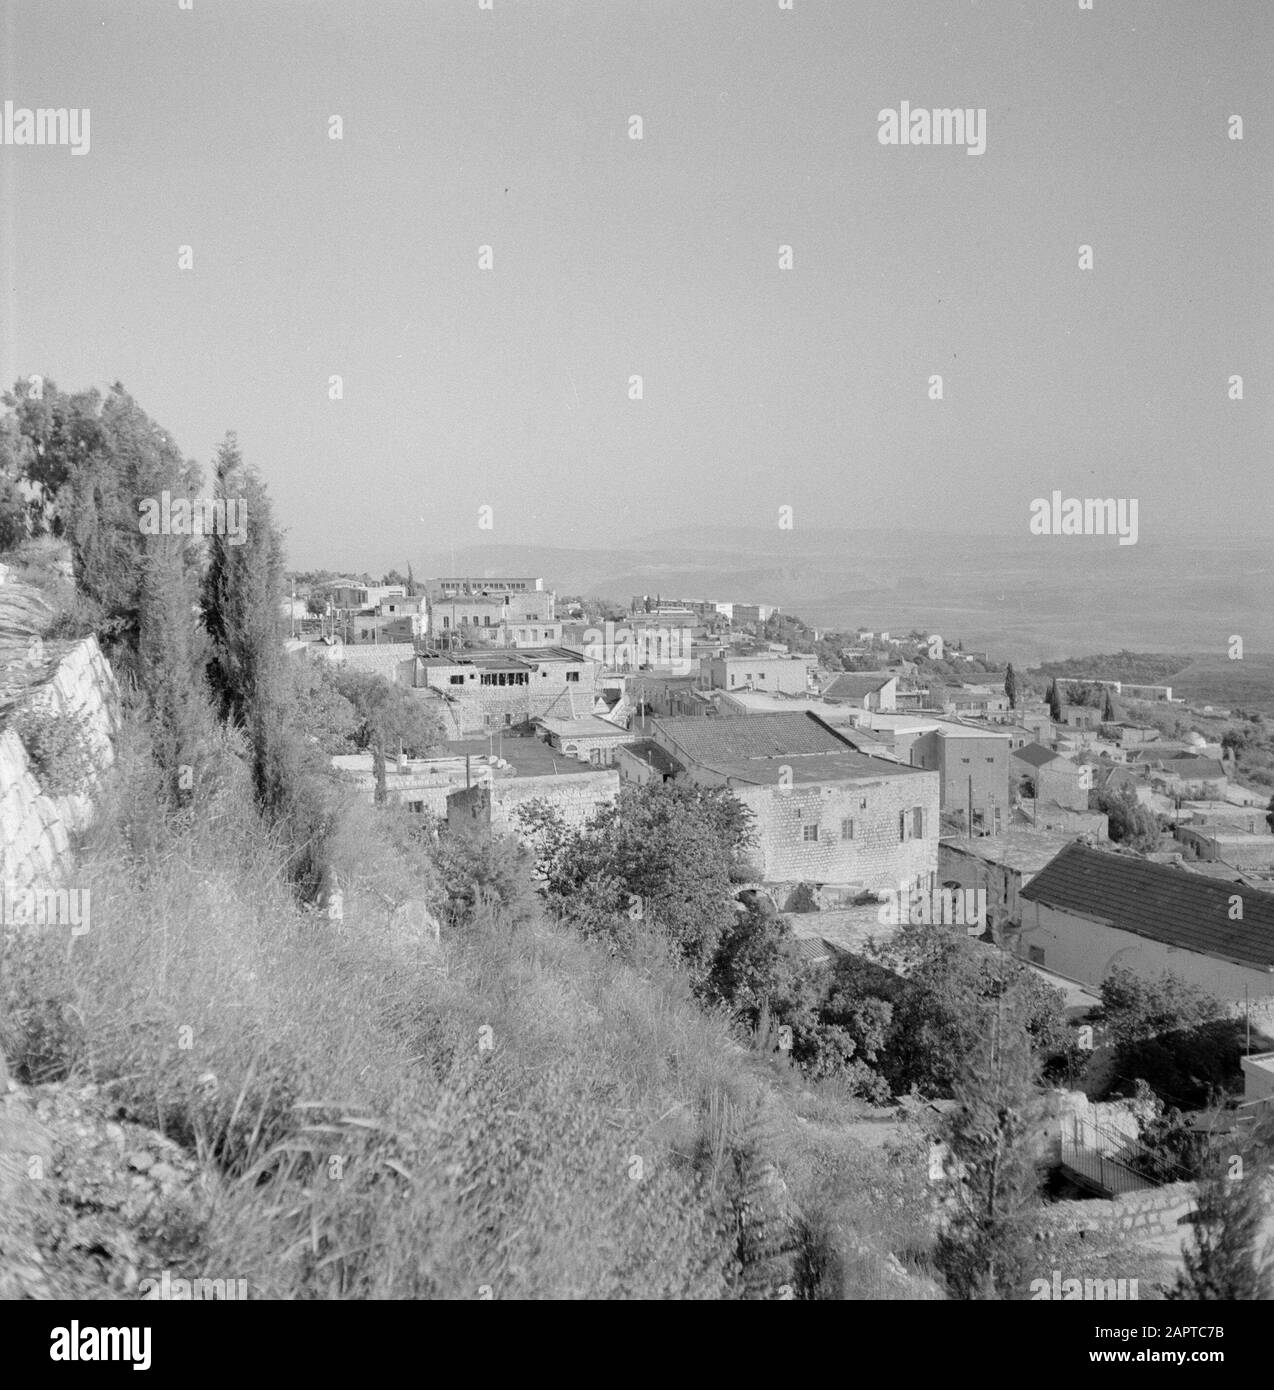 View of the city of Safad (Safed) from a hill Date: undated Location: Israel, Safad, Safed Keywords: hills, panoramas, housing Stock Photo